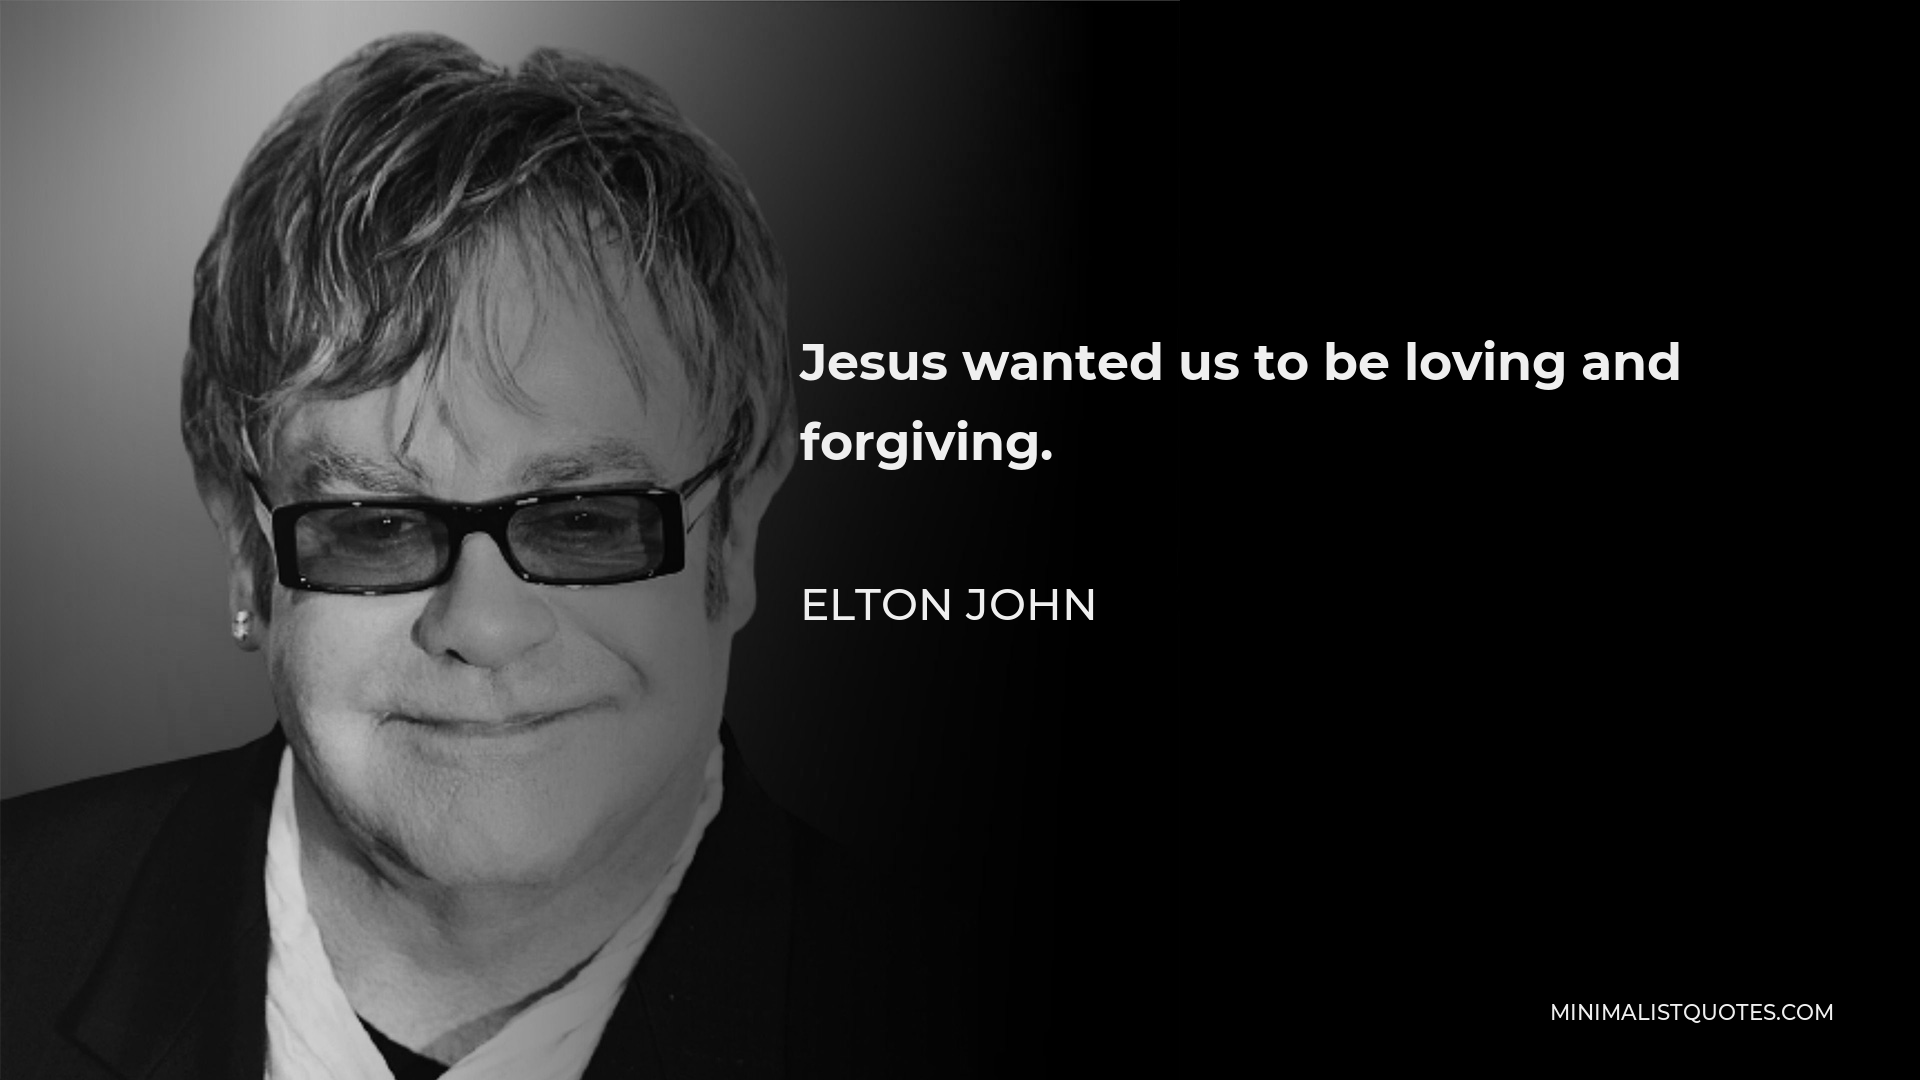 Elton John Quote - Jesus wanted us to be loving and forgiving.